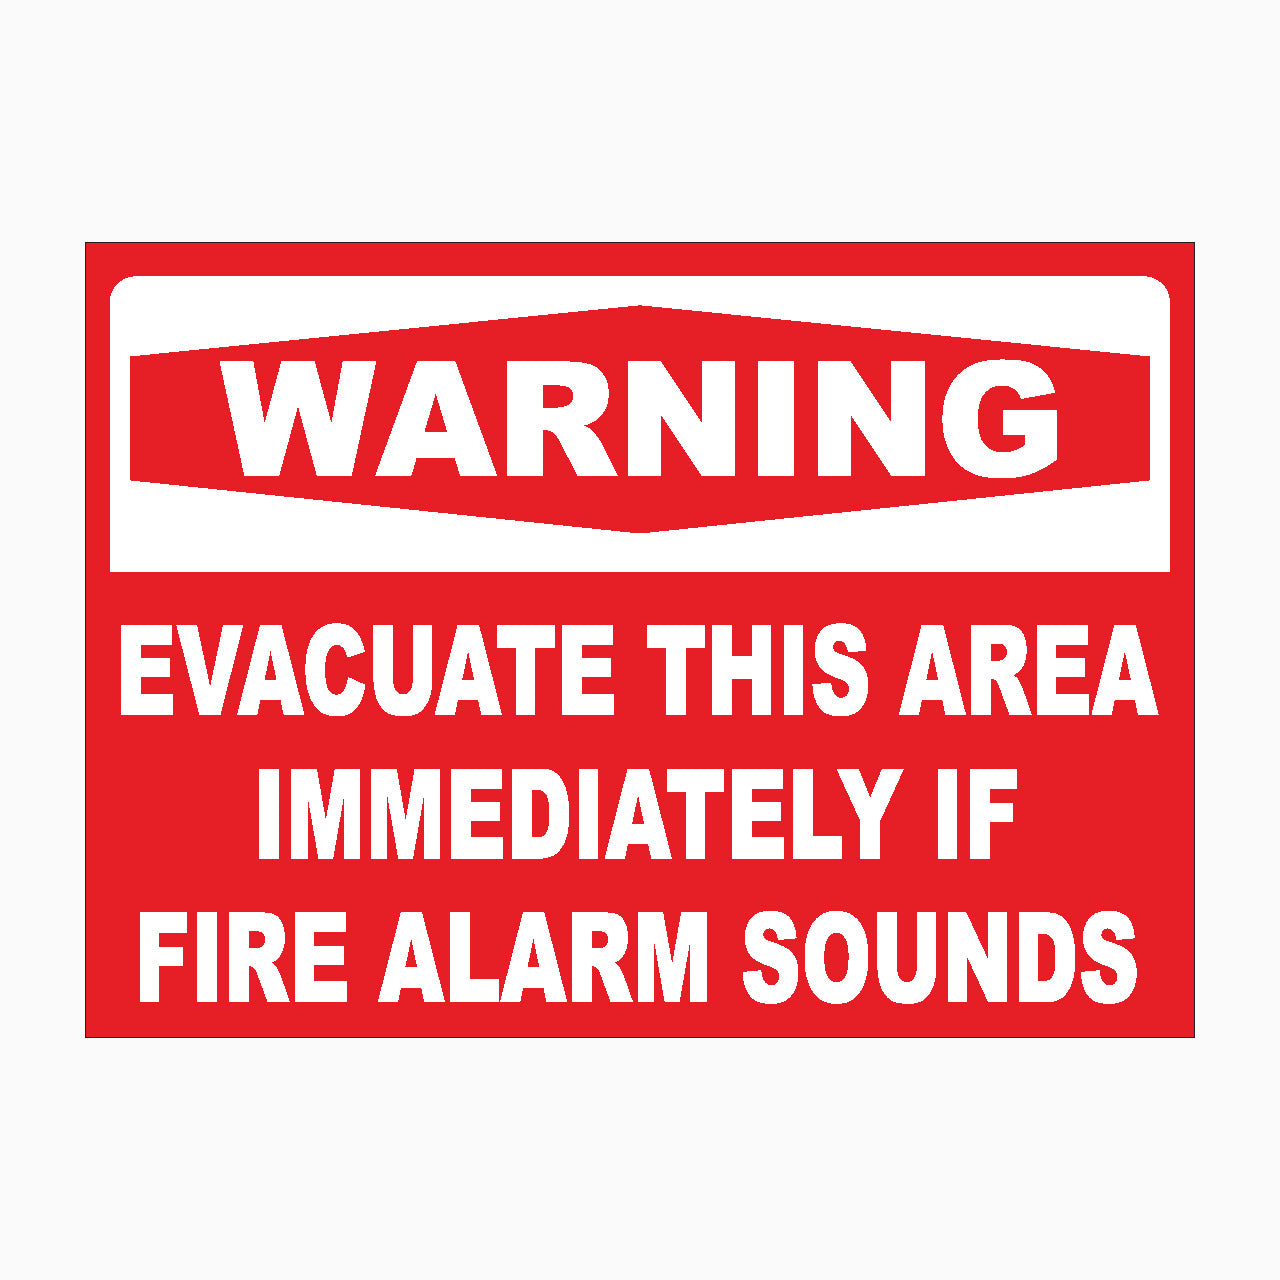 warning sign - EVACUATE THIS AREA IMMEDIATELY IF FIRE ALARM SOUNDS SIGN